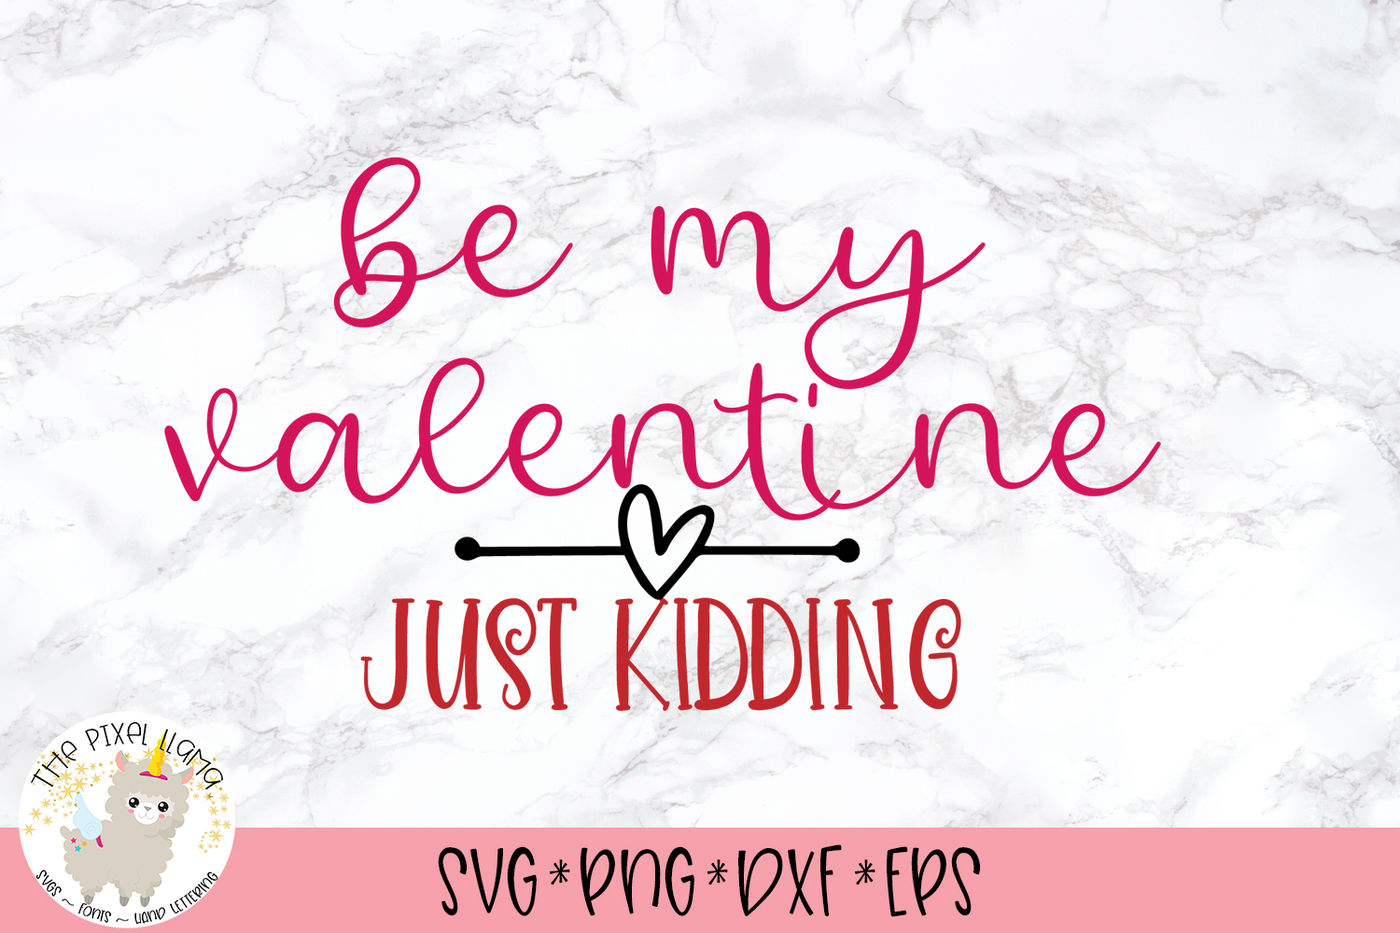 Be My Valentine Just Kidding Anti Valentine SVG Cut File By The Pixel